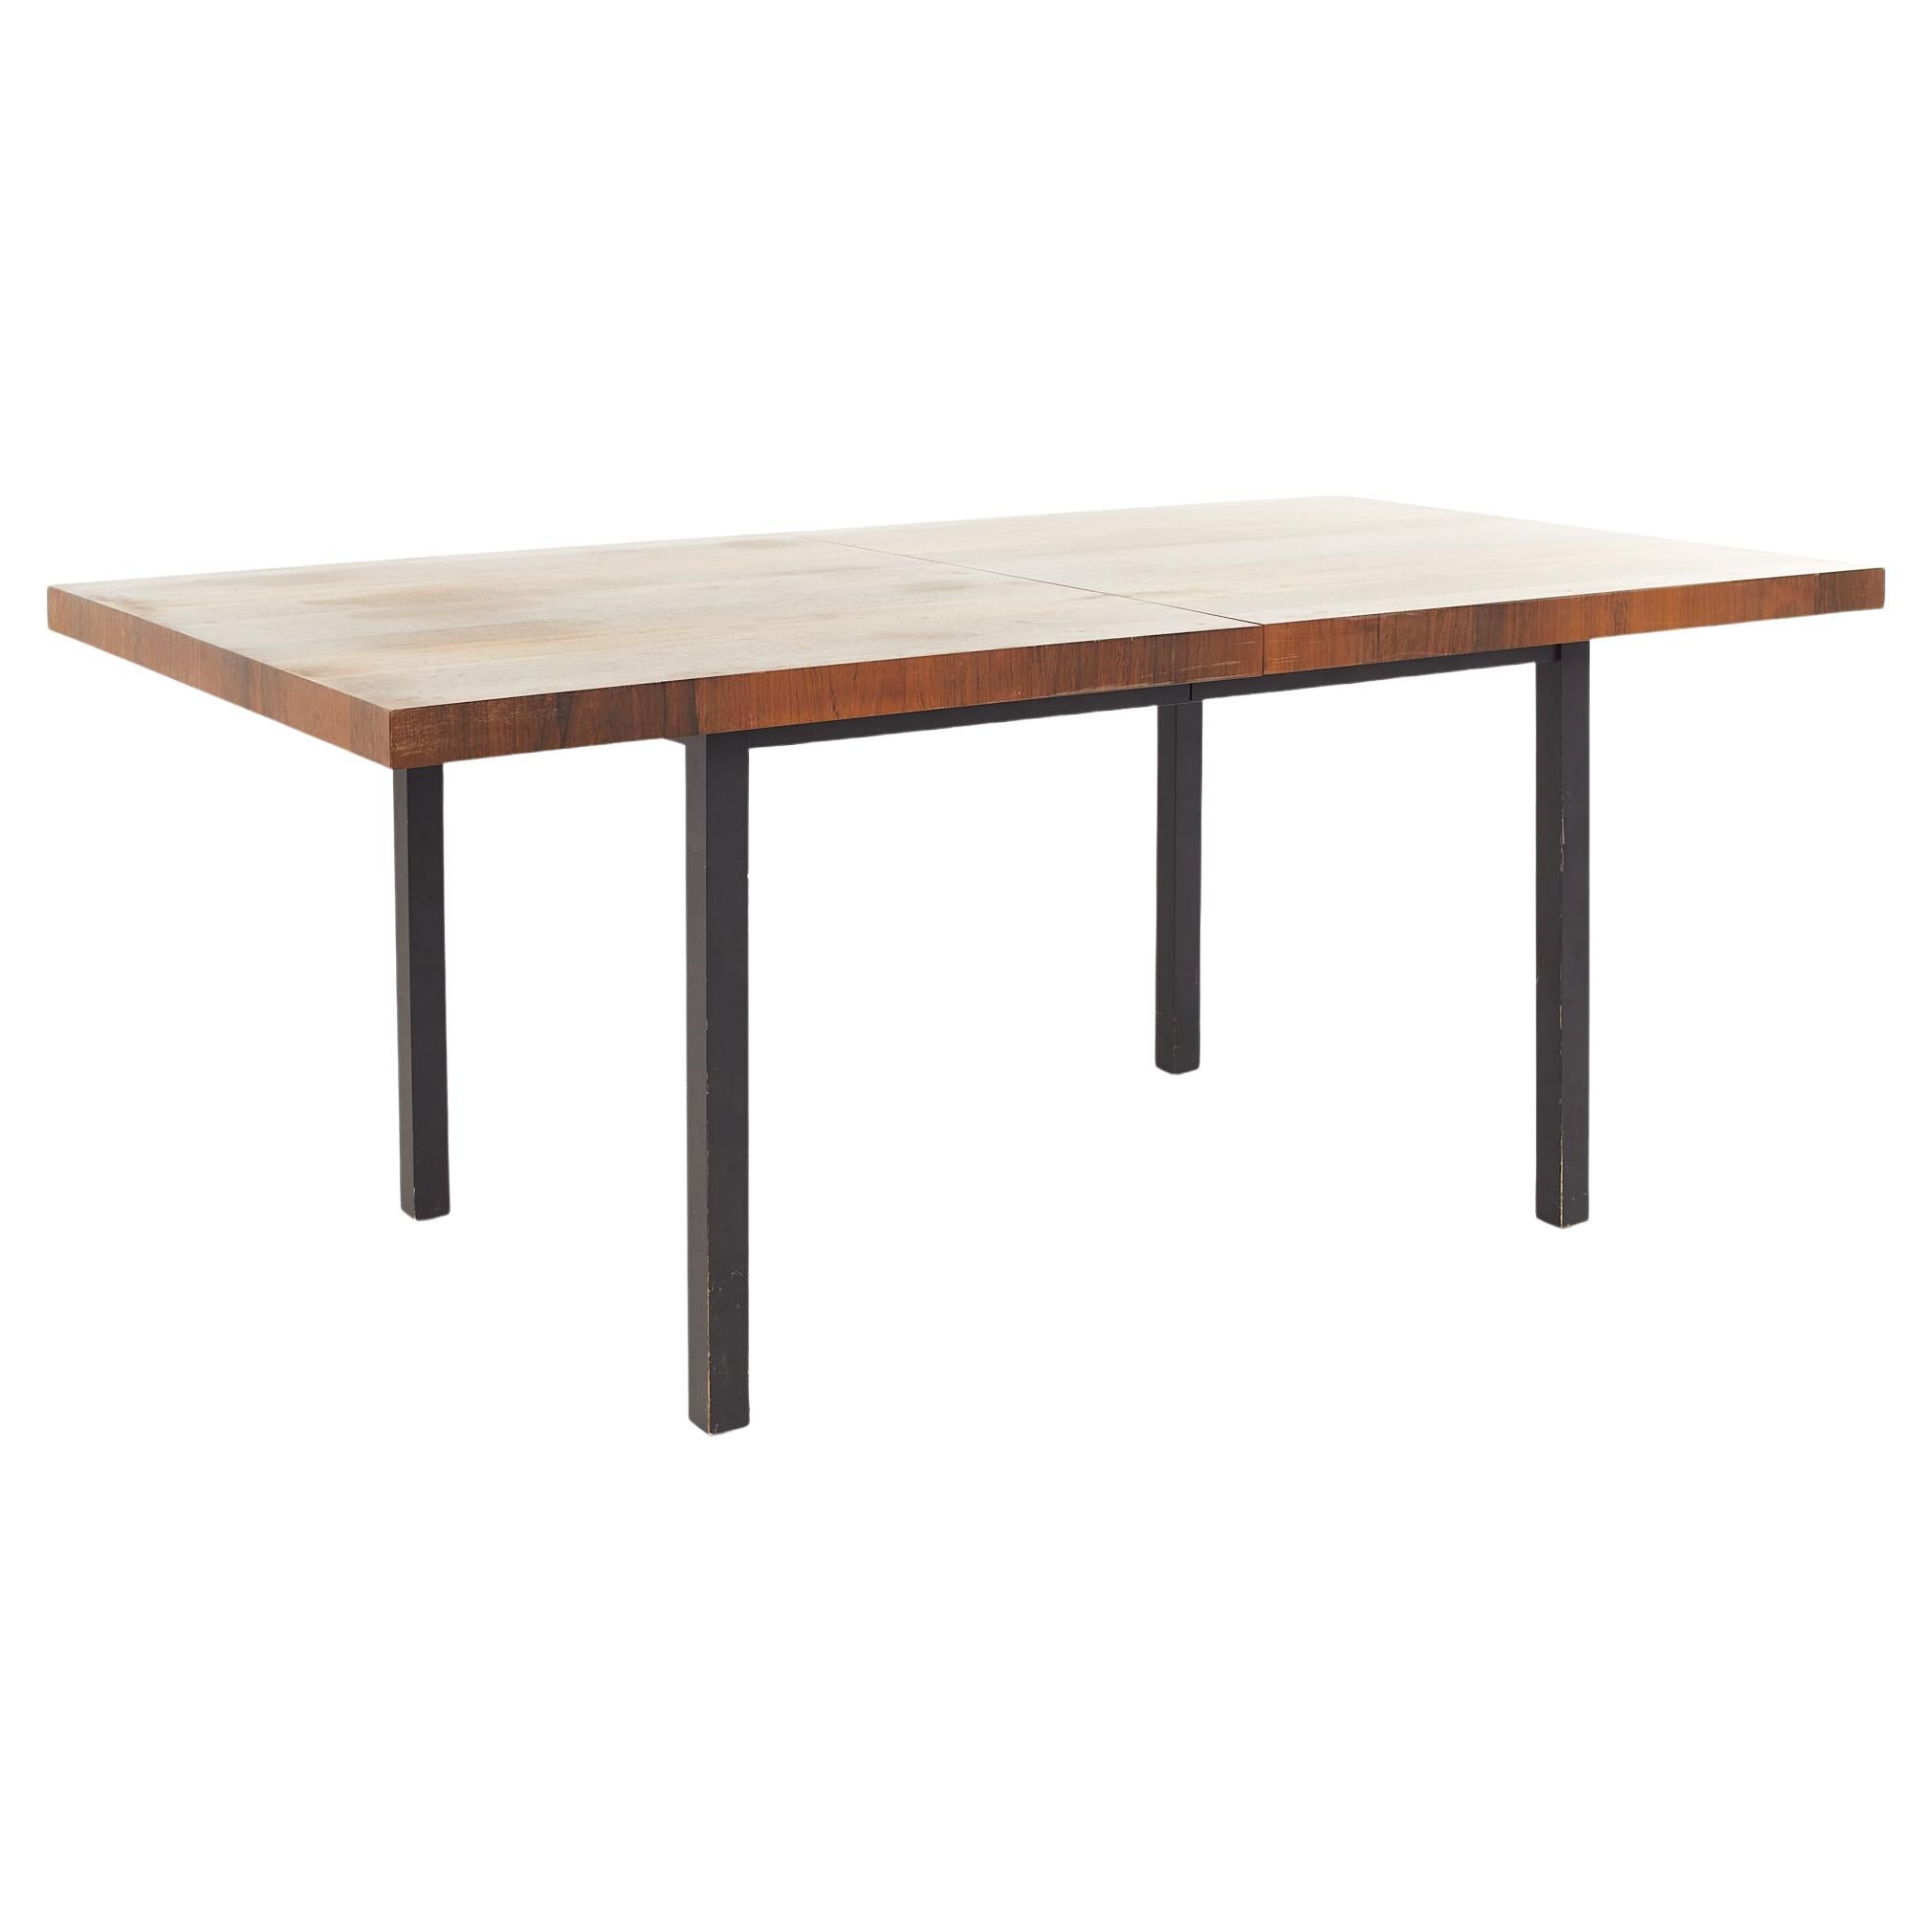 Milo Baughman for Directional Mid Century Multi-Wood Dining Table